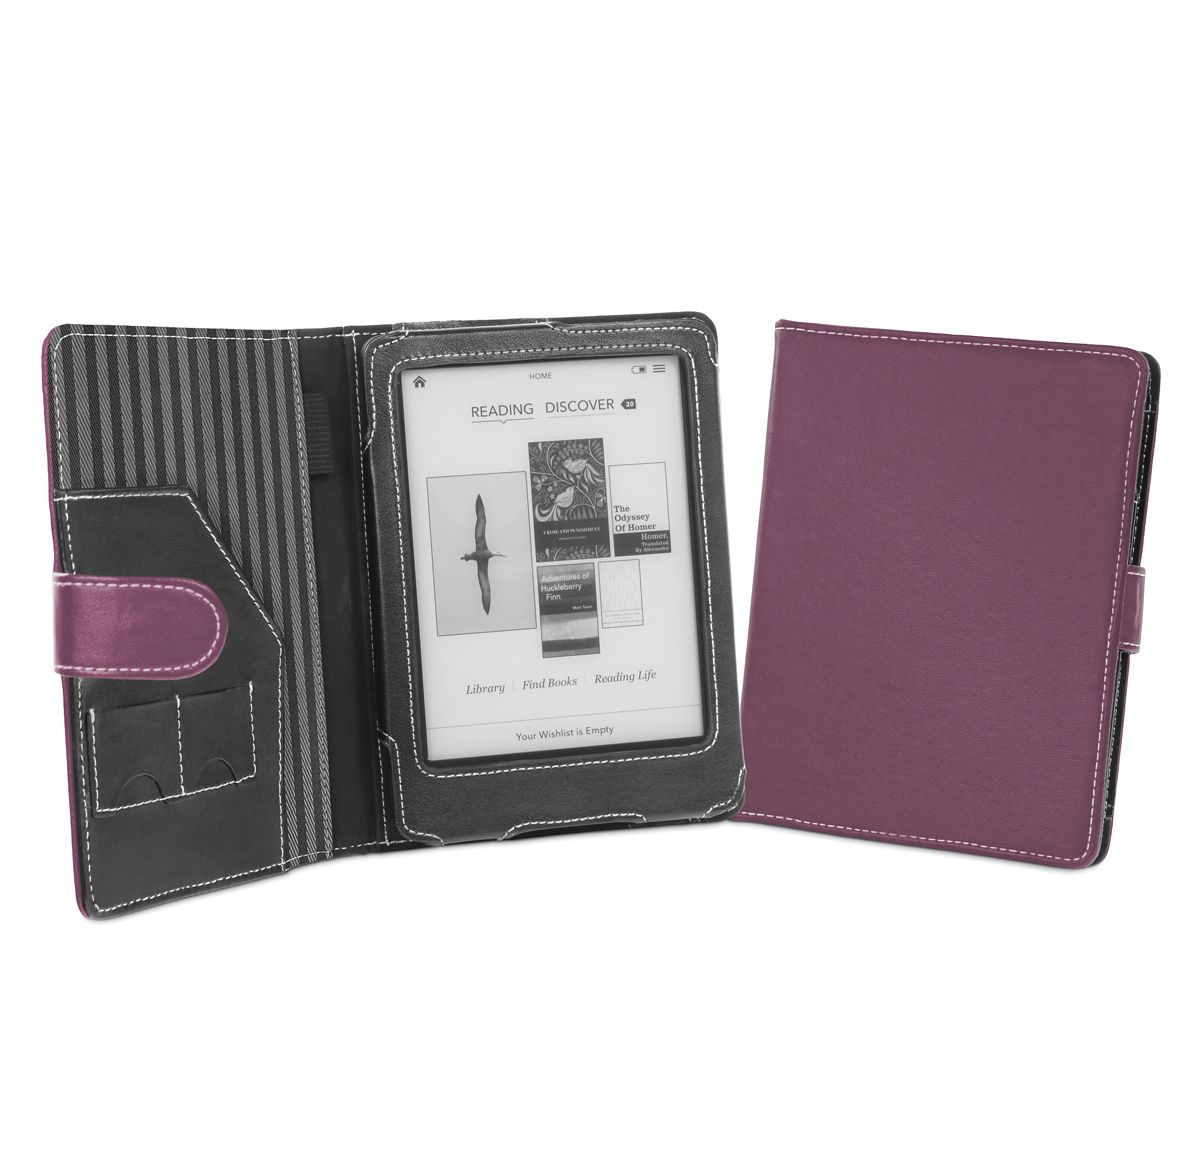 Cover Up Kobo Glo eReader Book Style Cover Case with Auto Sleep Wake